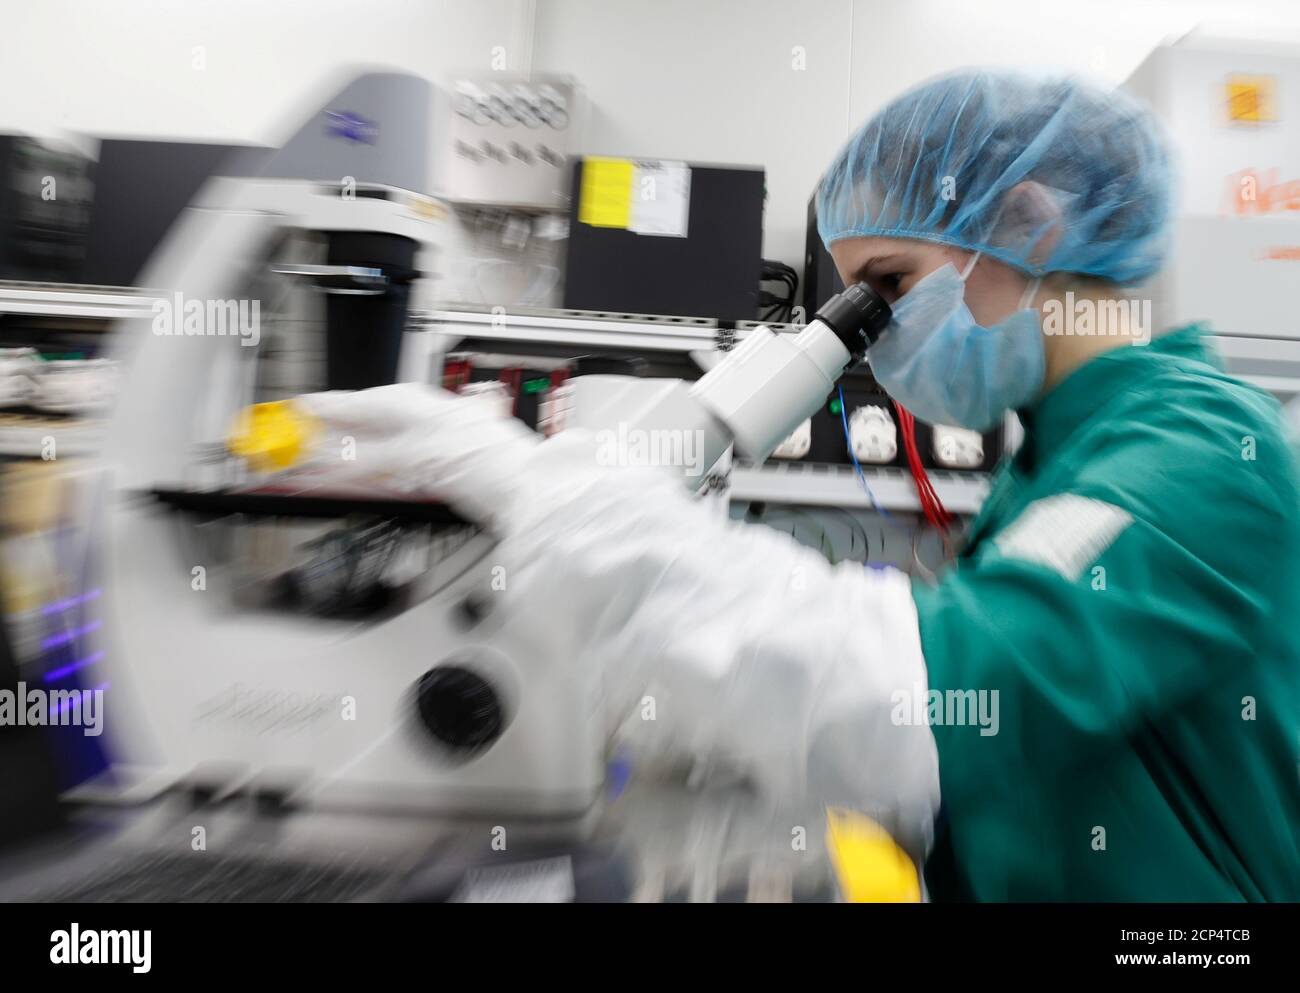 A scientist examines COVID-19 infected cells under a microscope during research for a vaccine against the coronavirus disease (COVID-19) at a laboratory of BIOCAD biotechnology company in Saint Petersburg, Russia May 20, 2020. REUTERS/Anton Vaganov Stock Photo